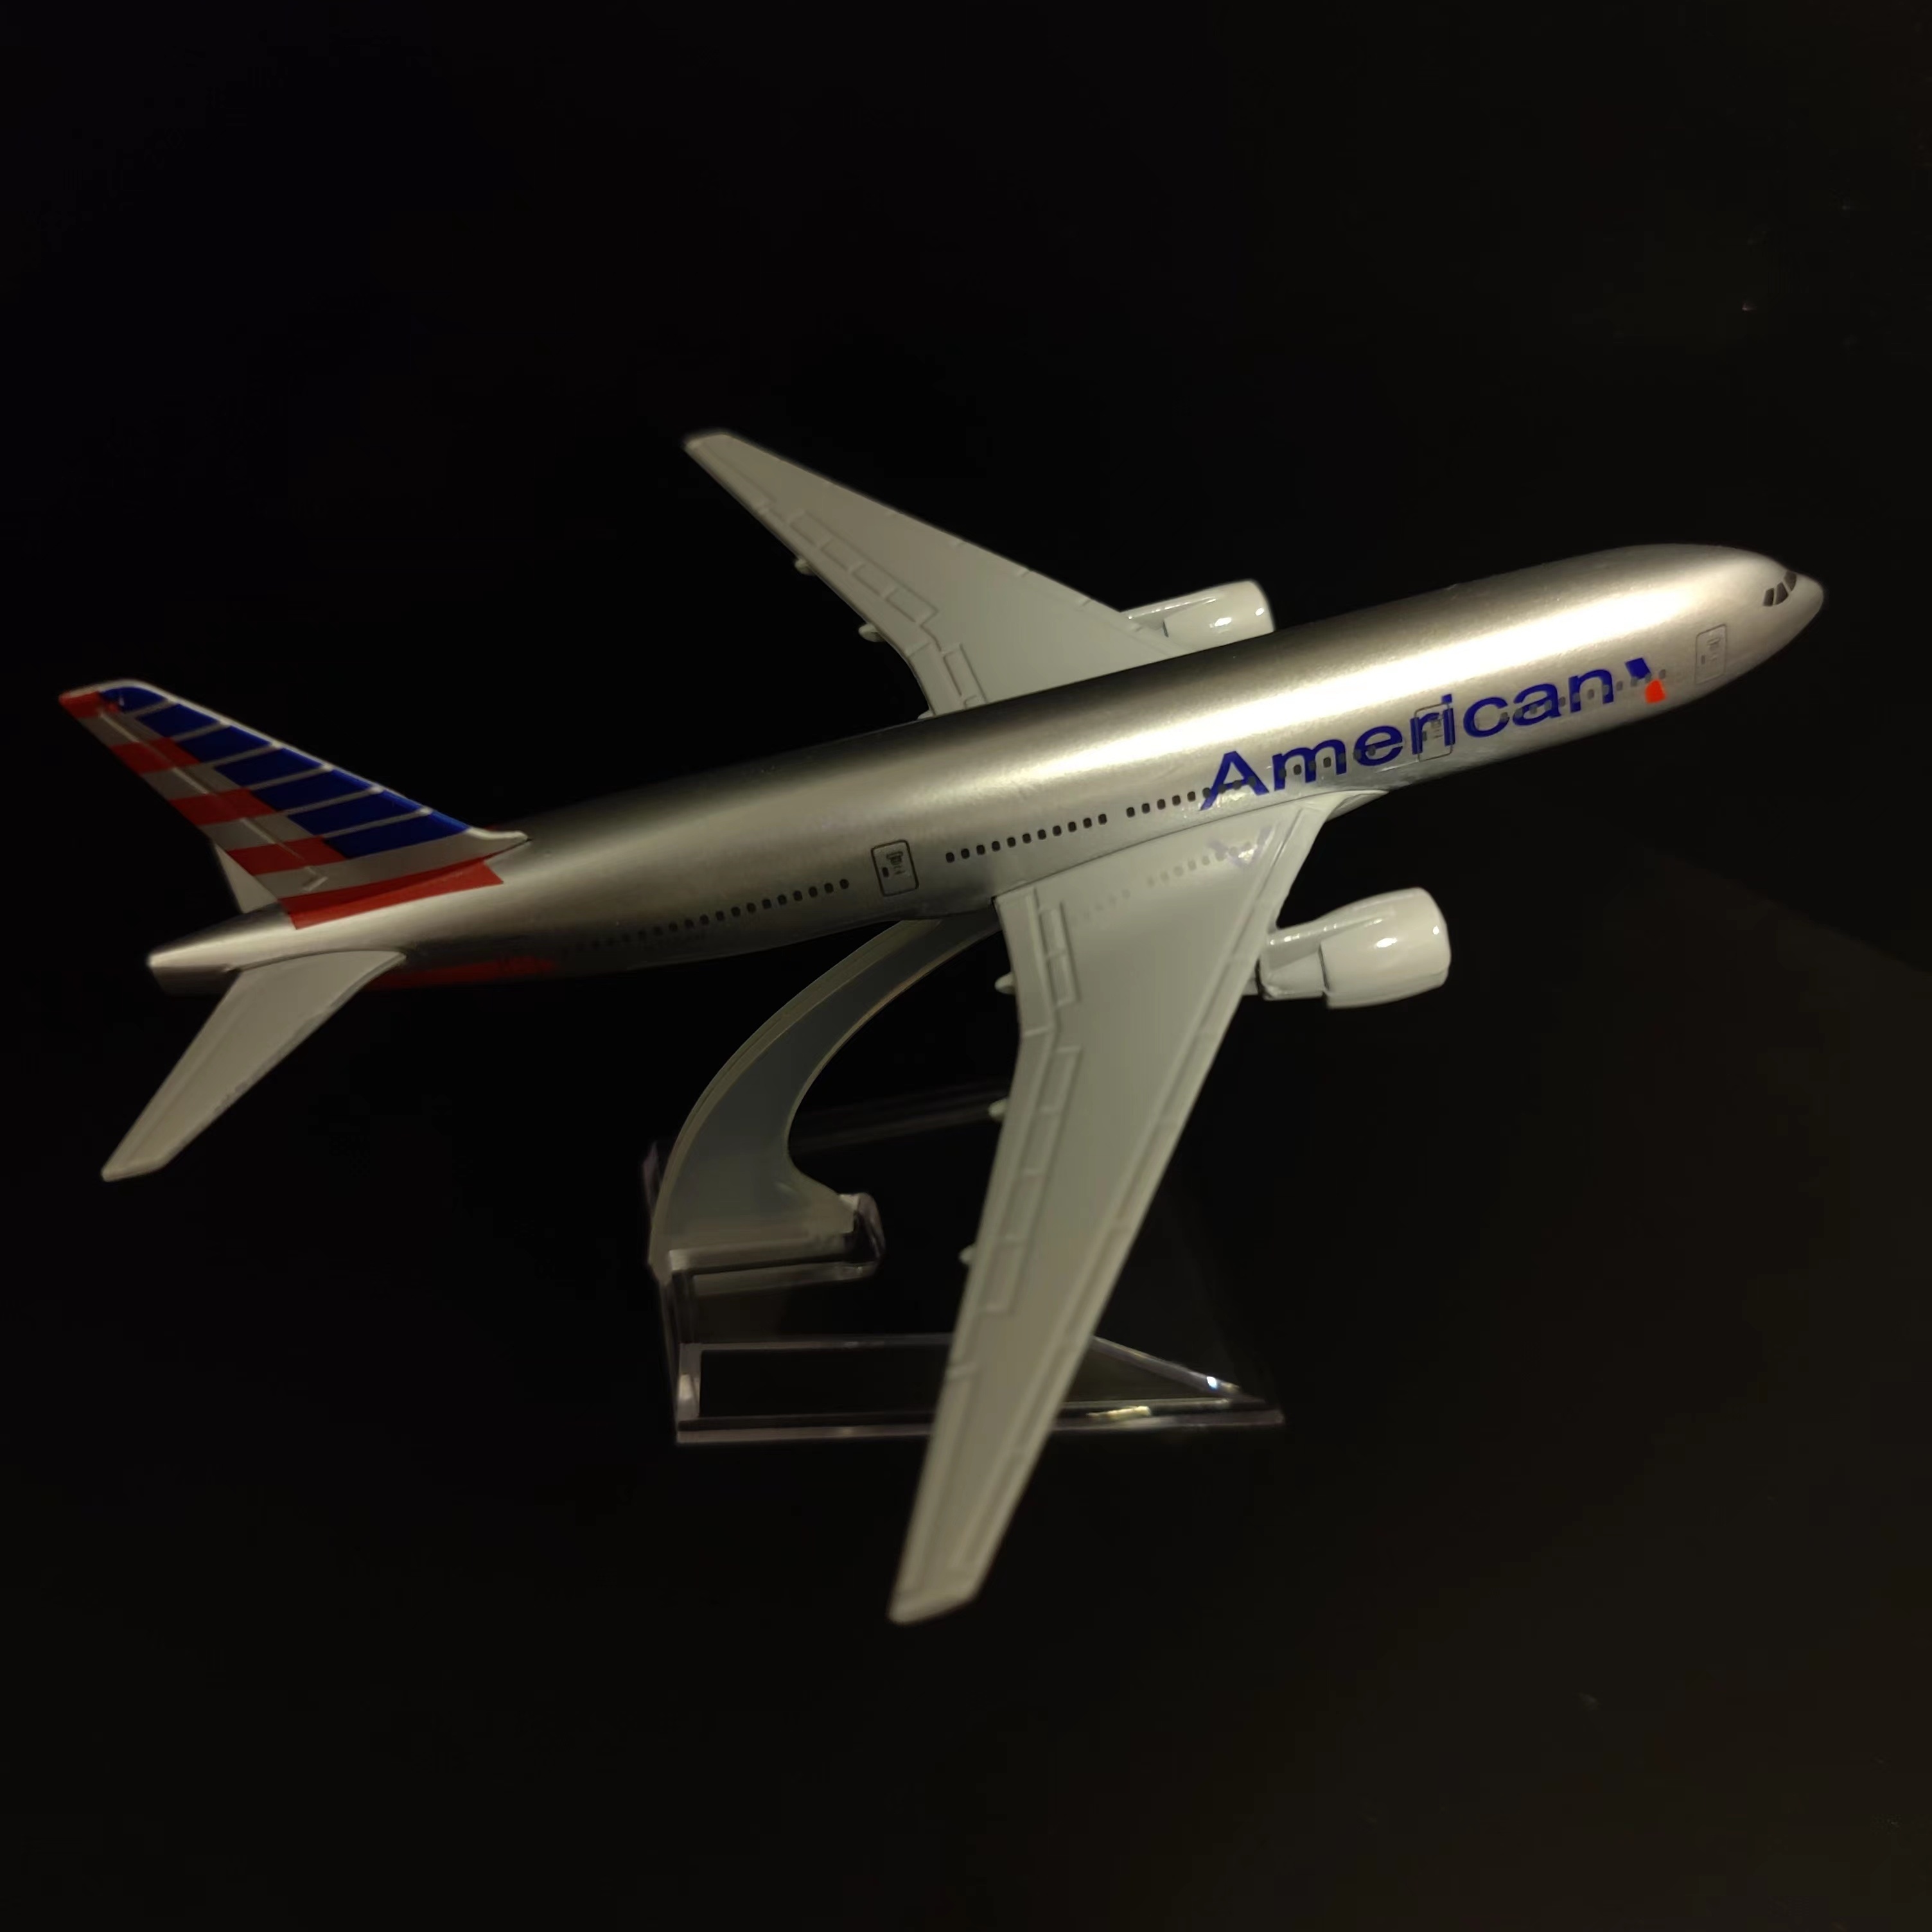 

777 Metal Diecast Airplane Model, 15cm Aircraft Miniature Collection For Aviation Fans, Home Office Decorative Ornament, Perfect Christmas Gift For Ages 14+